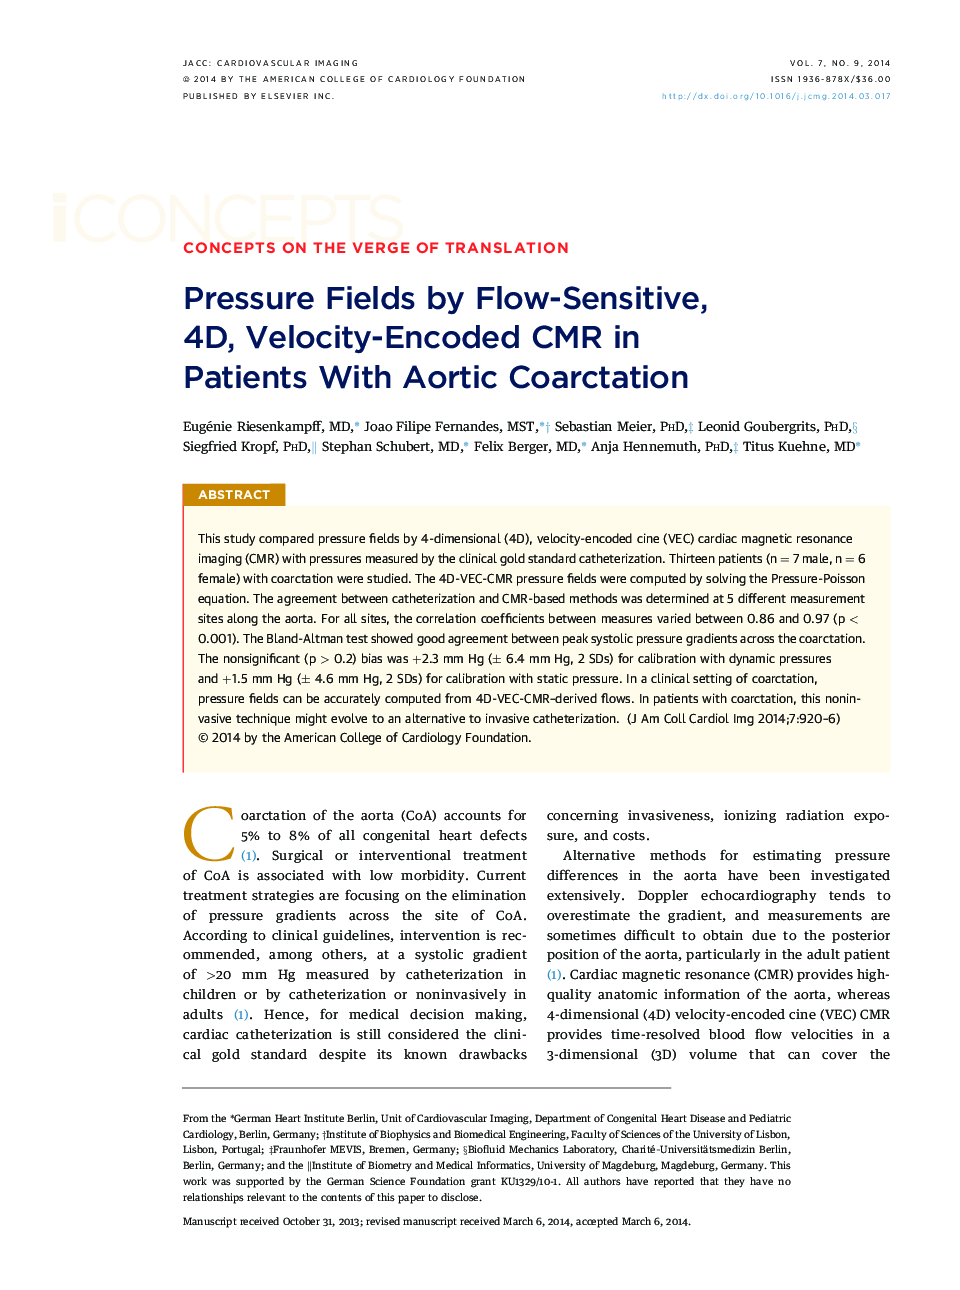 Pressure Fields by Flow-Sensitive, 4D, Velocity-Encoded CMR in PatientsÂ With Aortic Coarctation